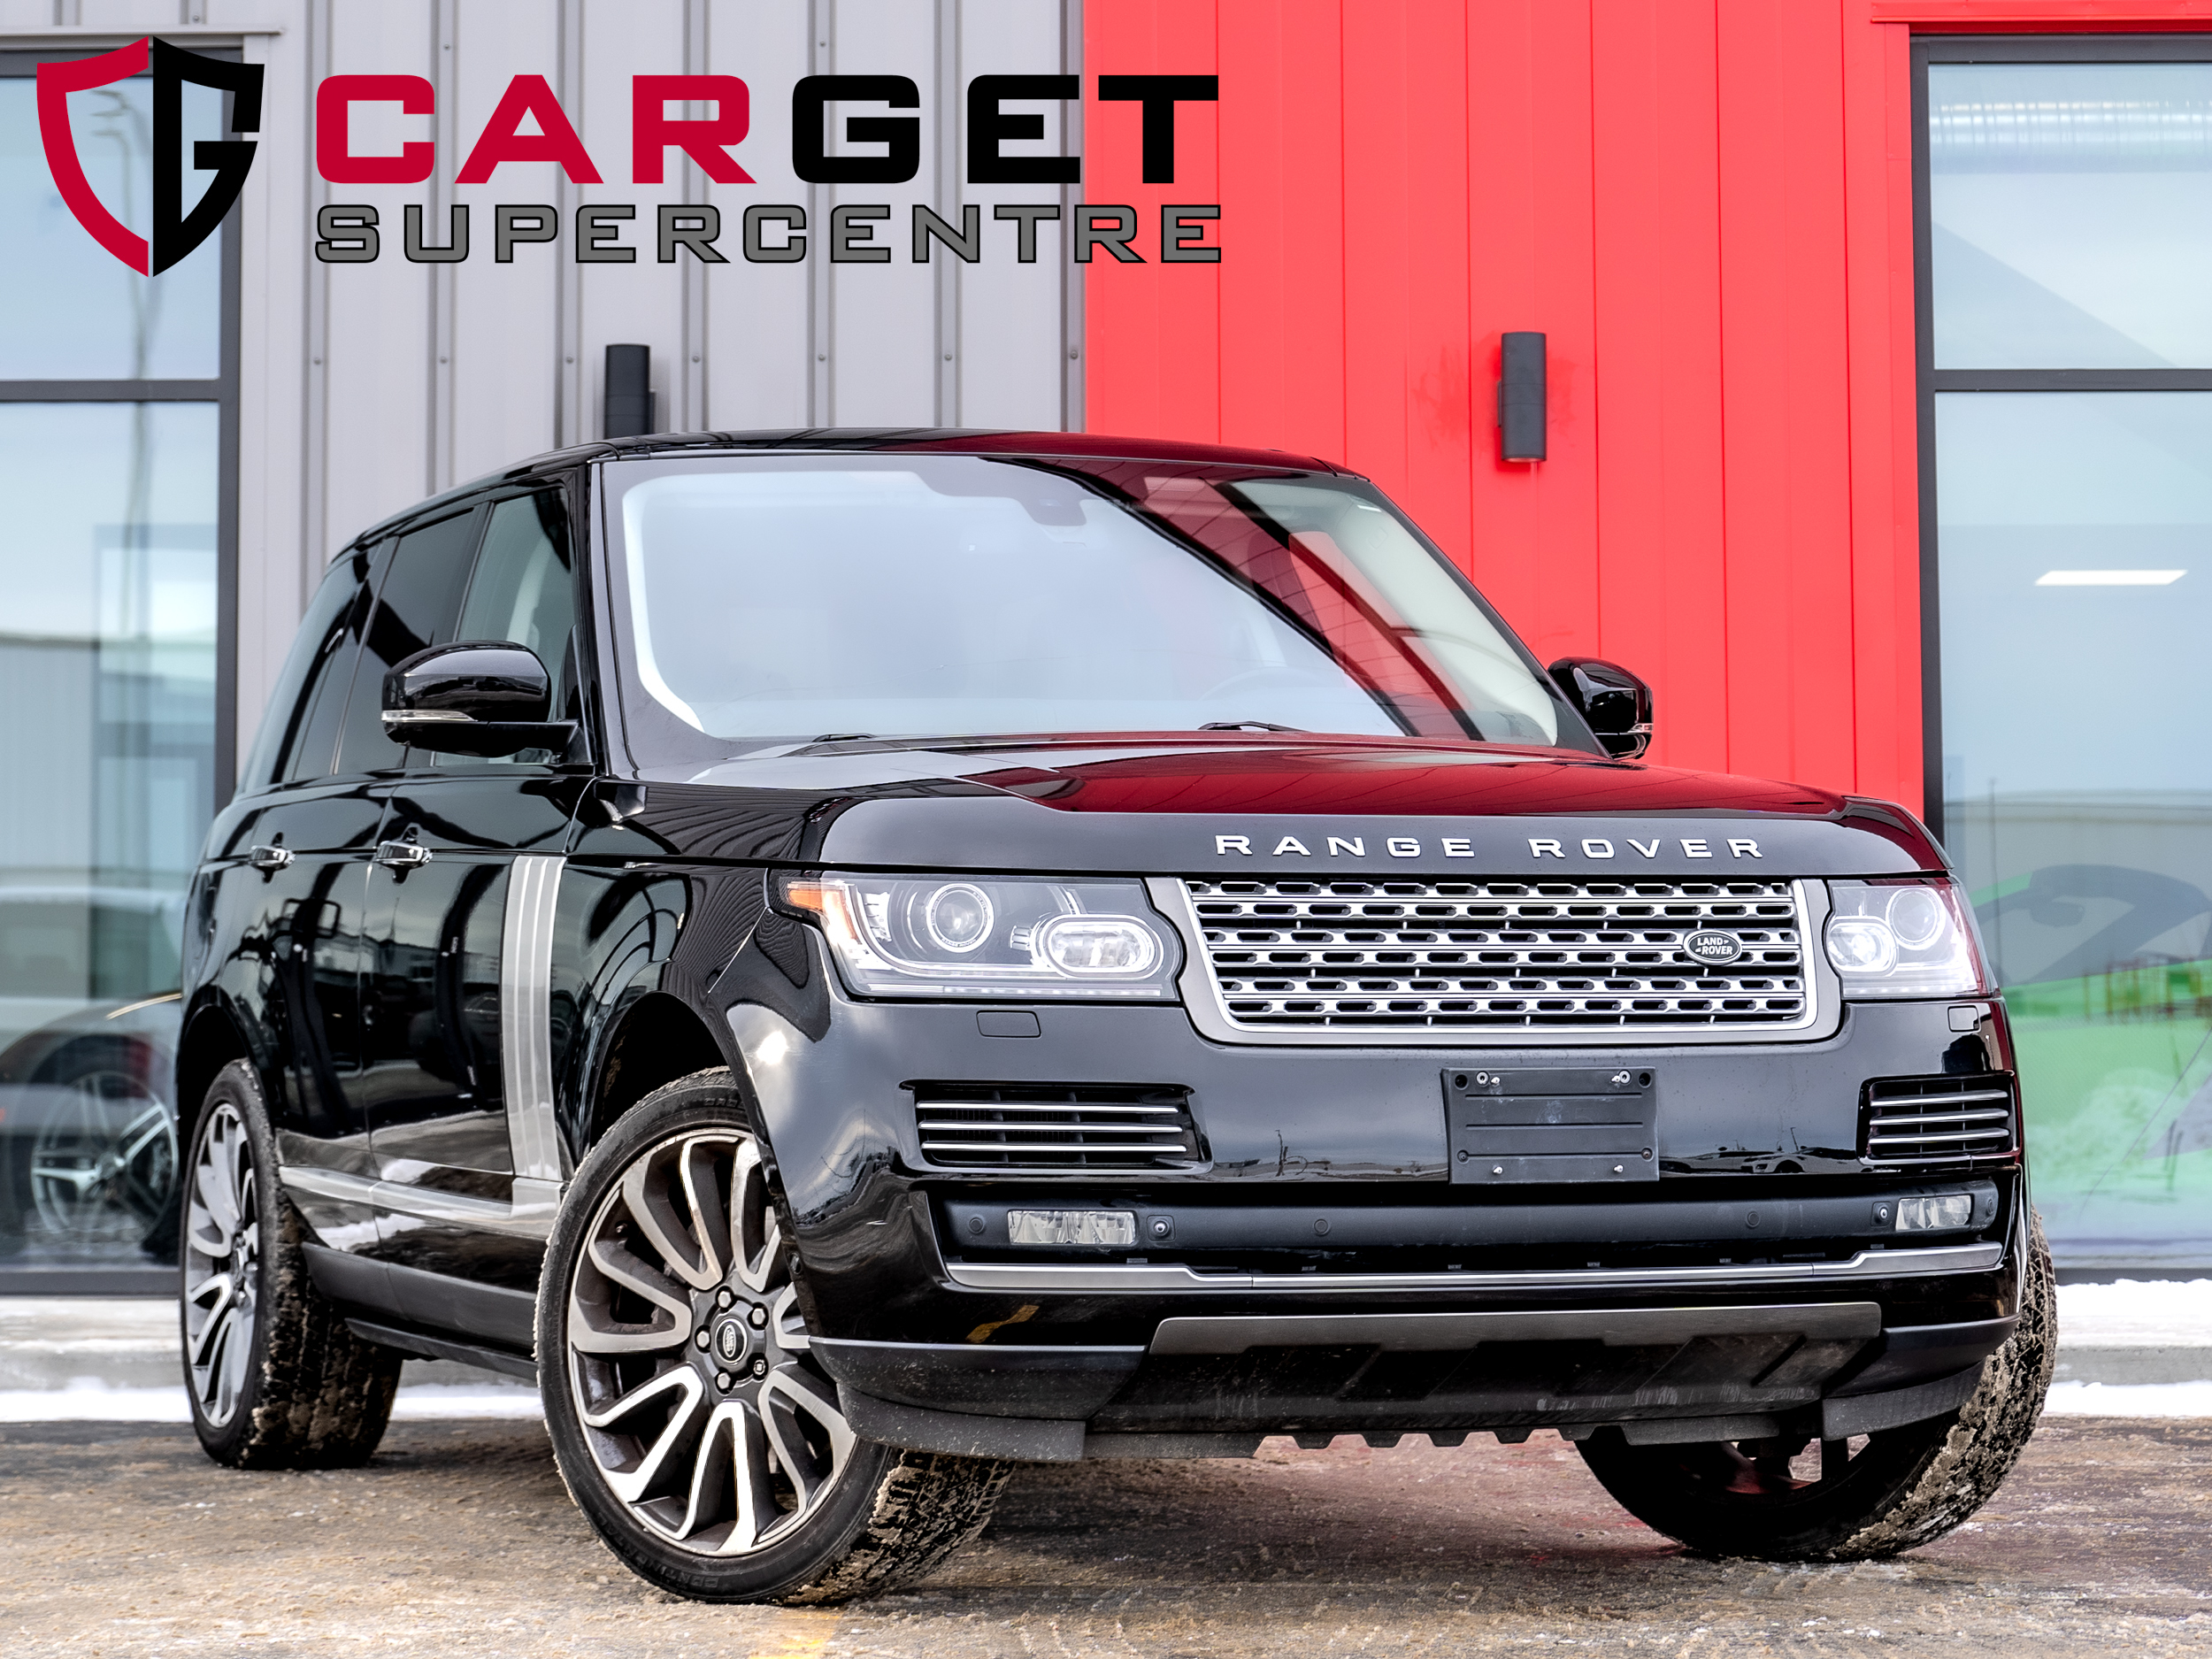 2015 Land Rover Range Rover Autobiography - Navy Leather | Leather Headliner